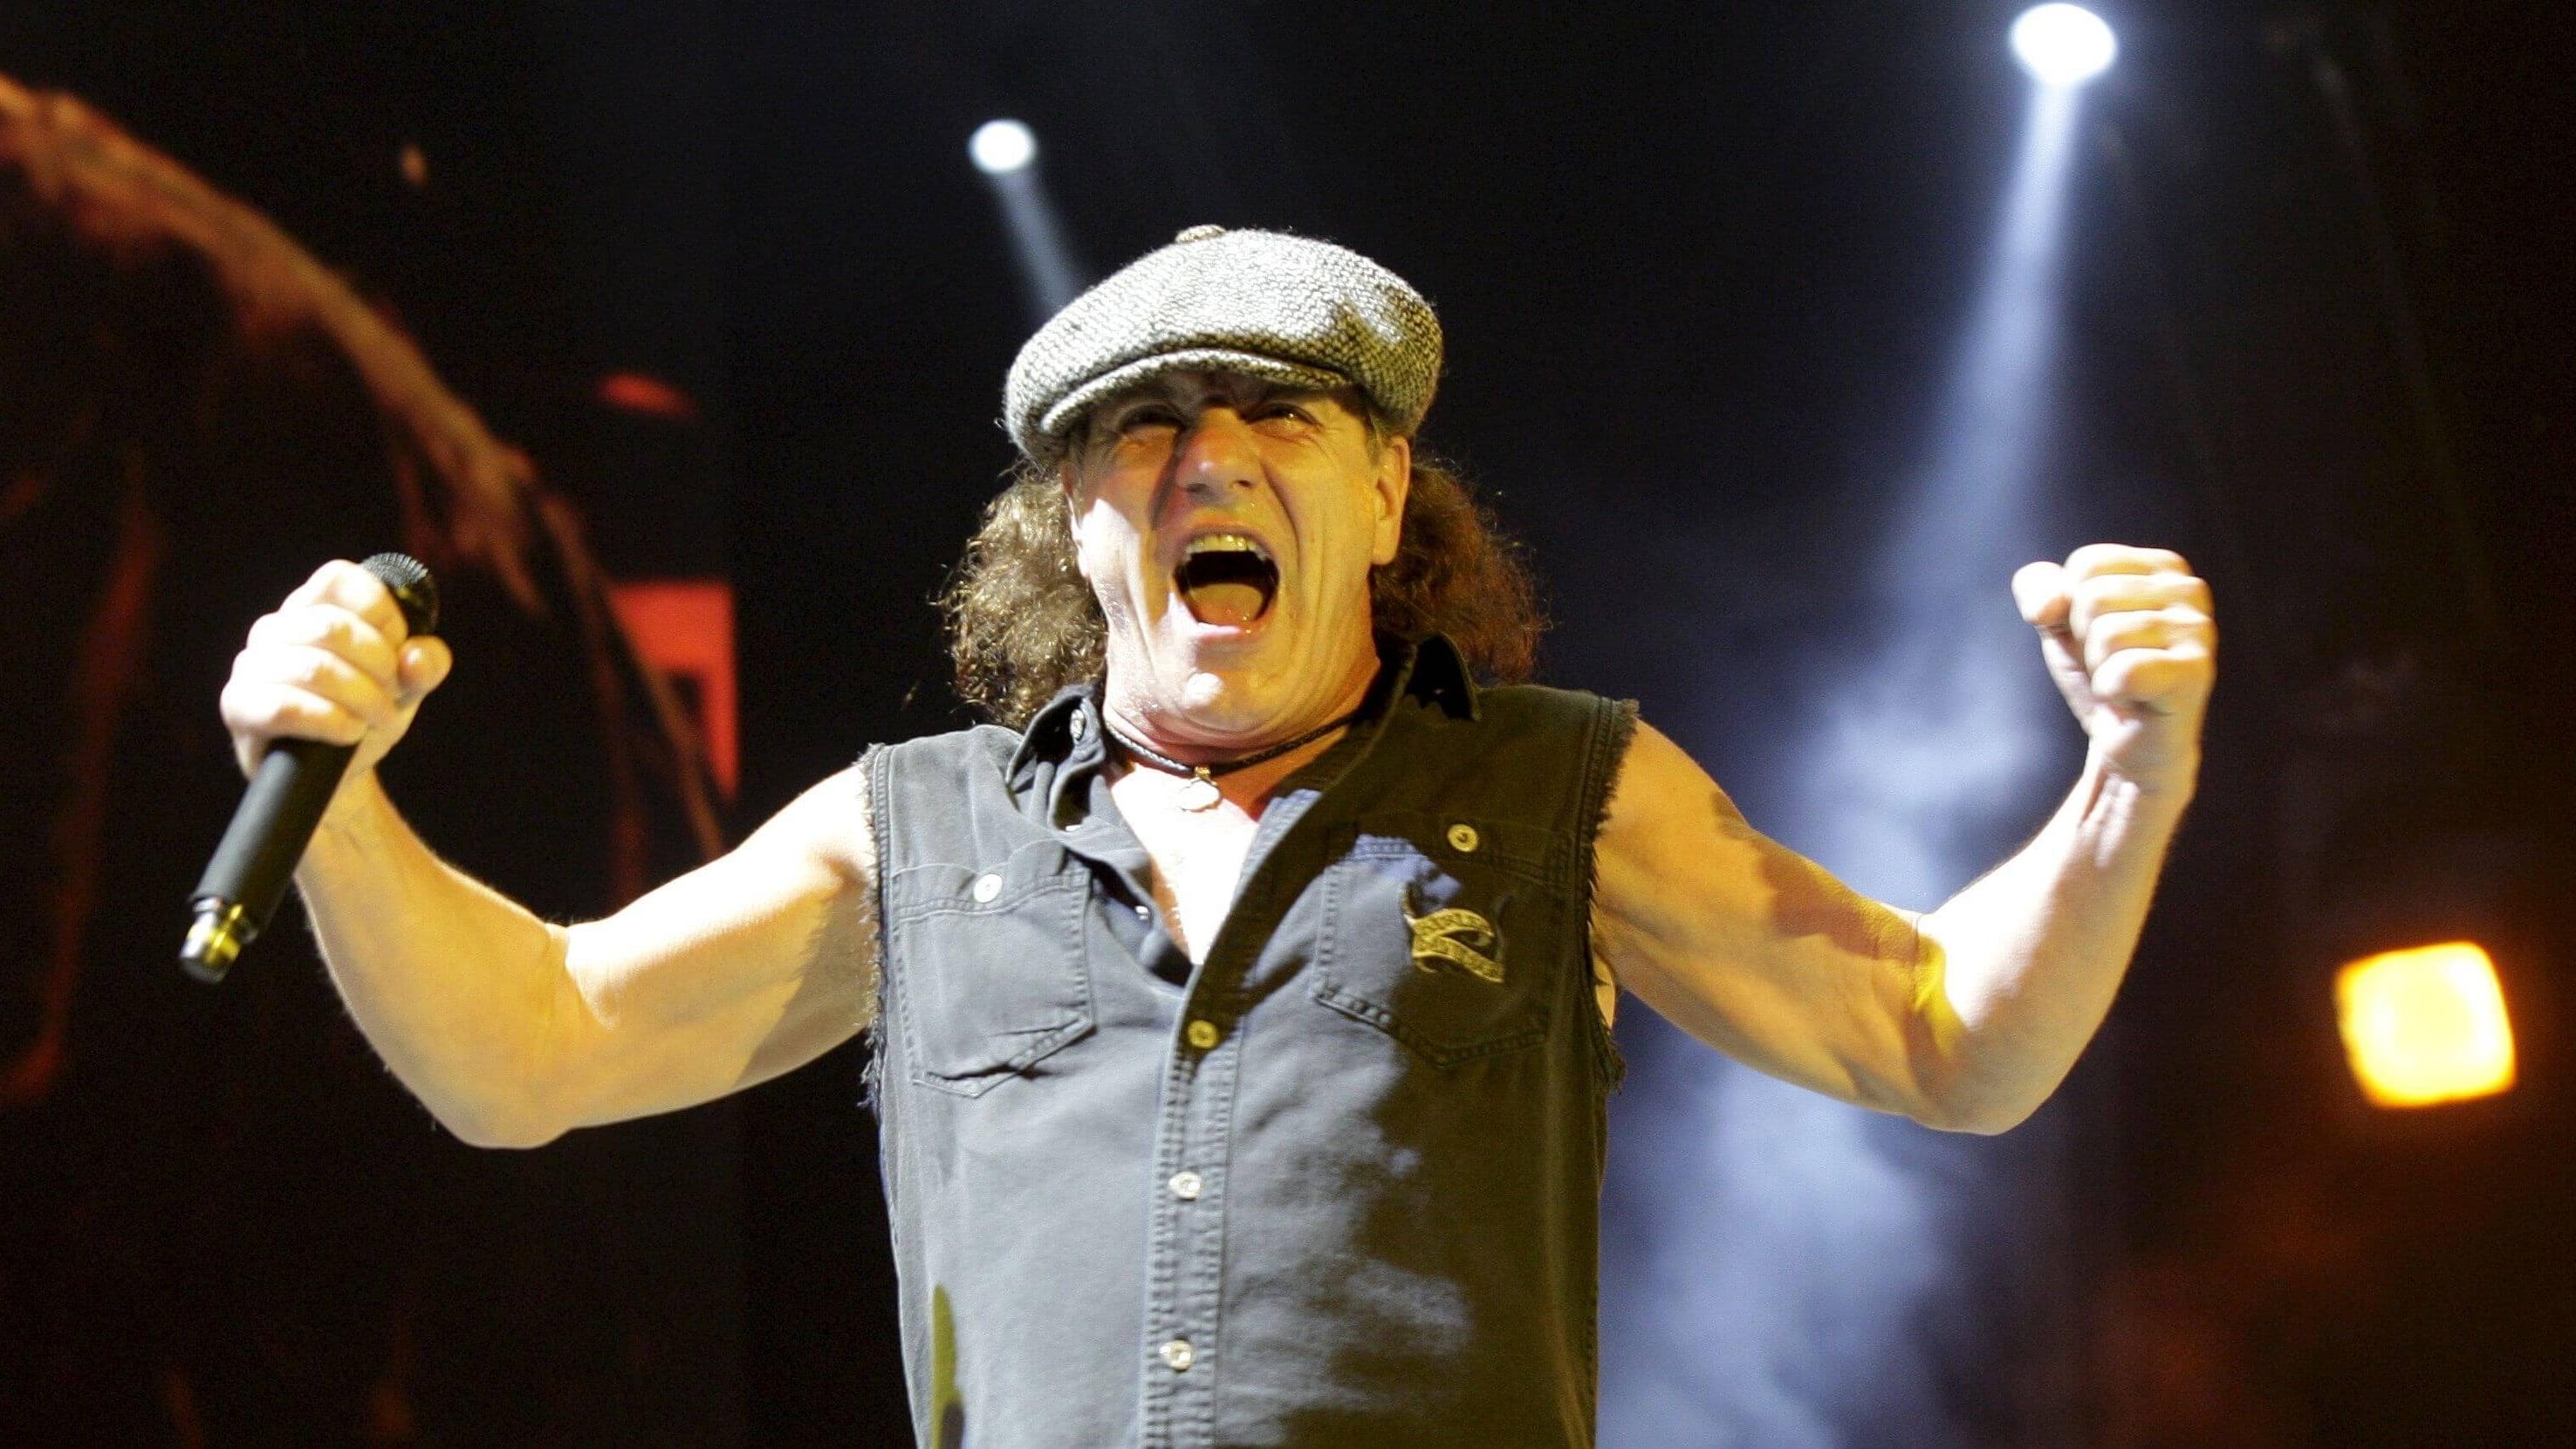 Brian Johnson's A Life on the Road backdrop